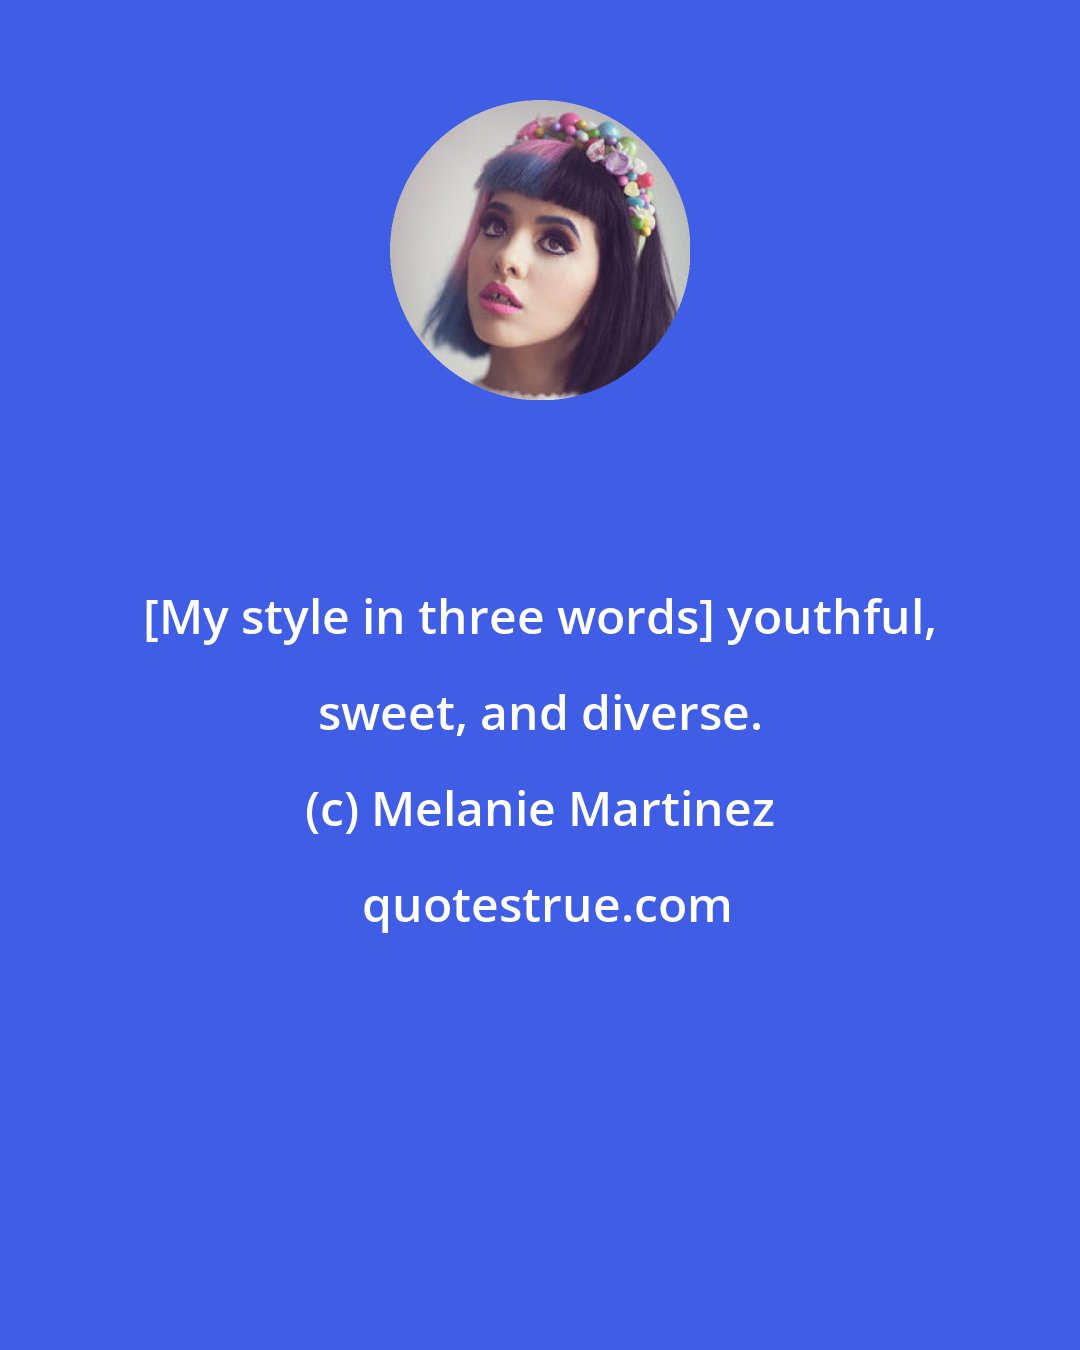 Melanie Martinez: [My style in three words] youthful, sweet, and diverse.